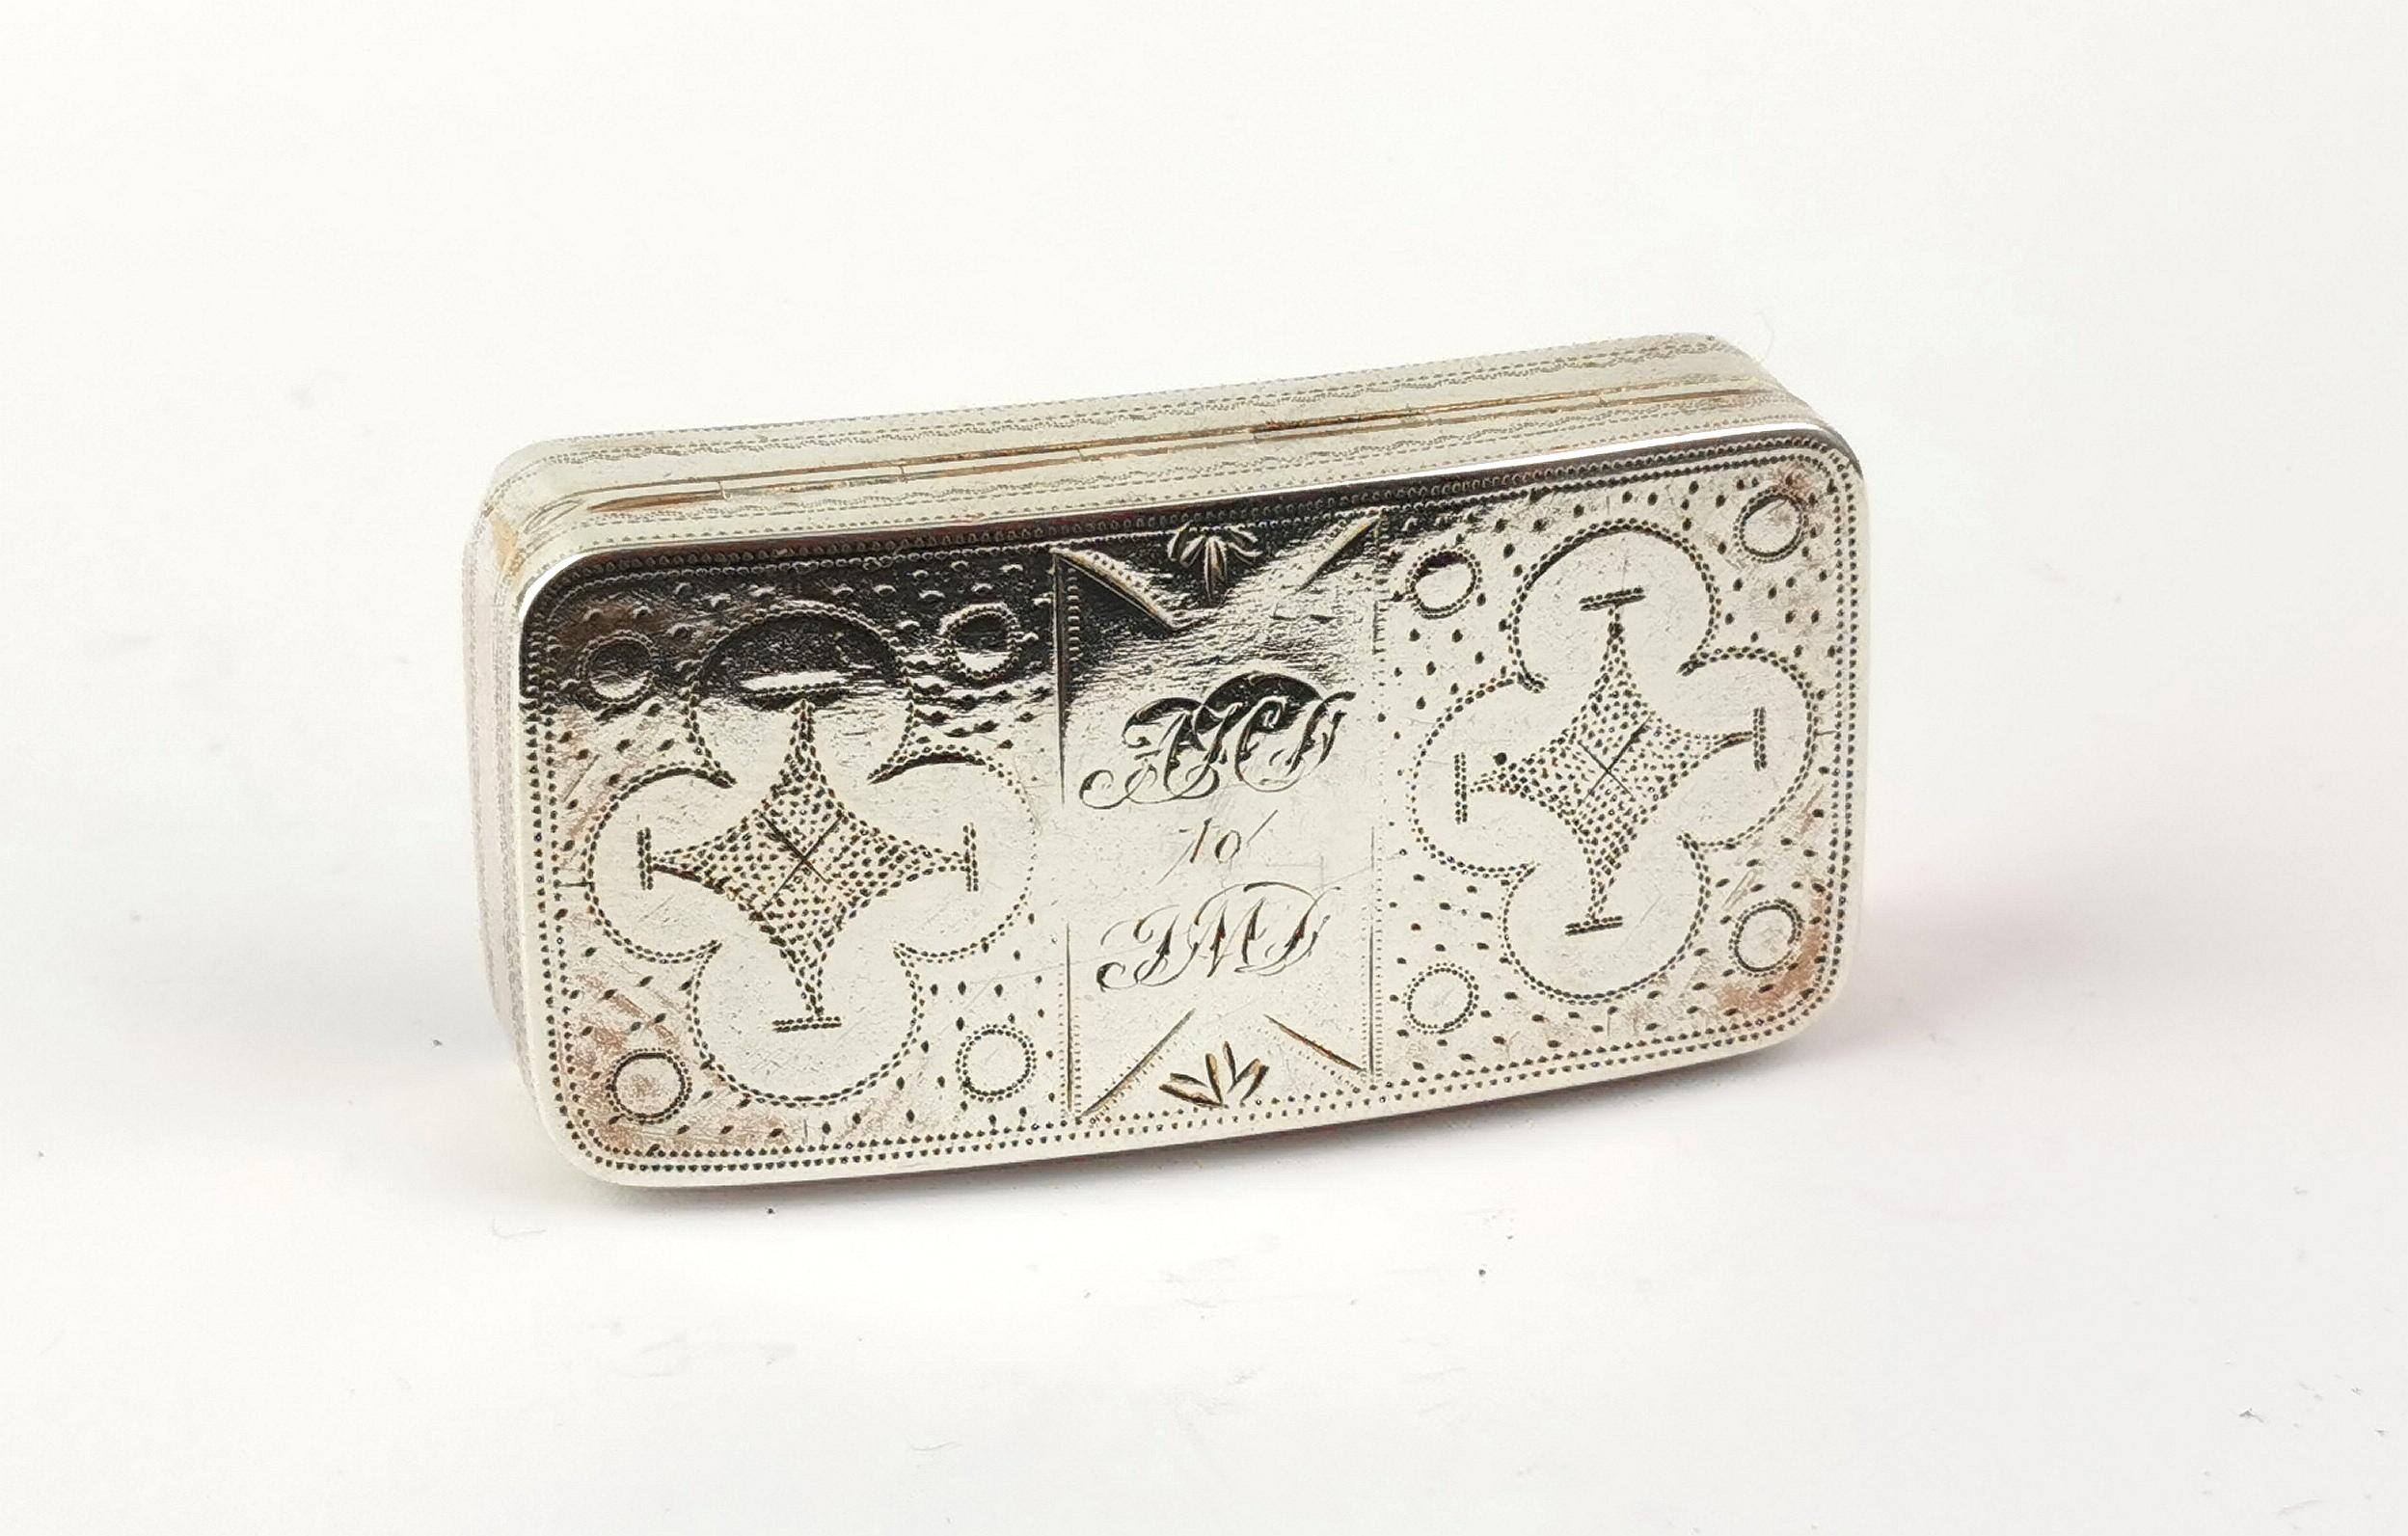 A fantastic antique Georgian era sterling silver snuff box.

It has an interesting bright cut engraved design both top and bottom with initials to the top in fancy script.

The box has an ergonomic curved profile and retains its lovely rich golden